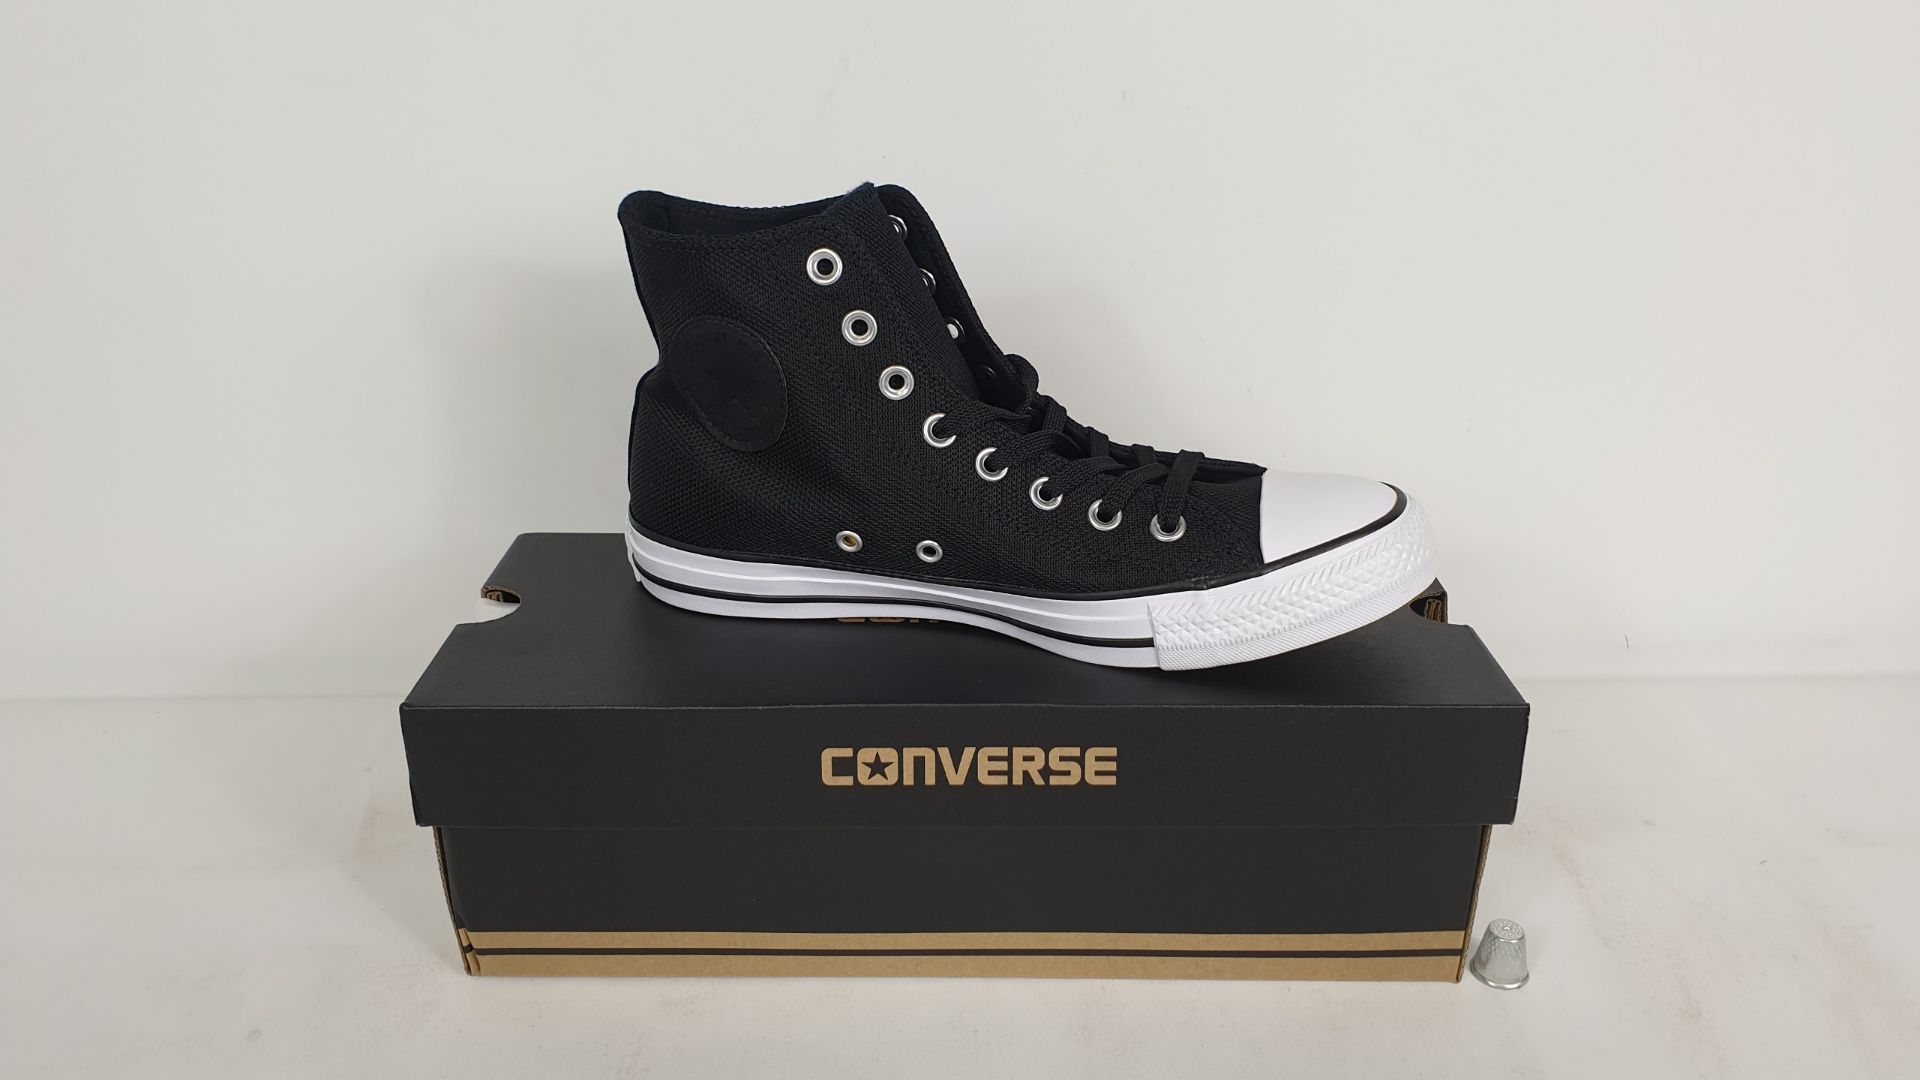 6 X PAIRS OF CONVERSE TRAINERS CTAS HI BLACK/ WHITE SIZE 7 - BRAND NEW AND BOXED